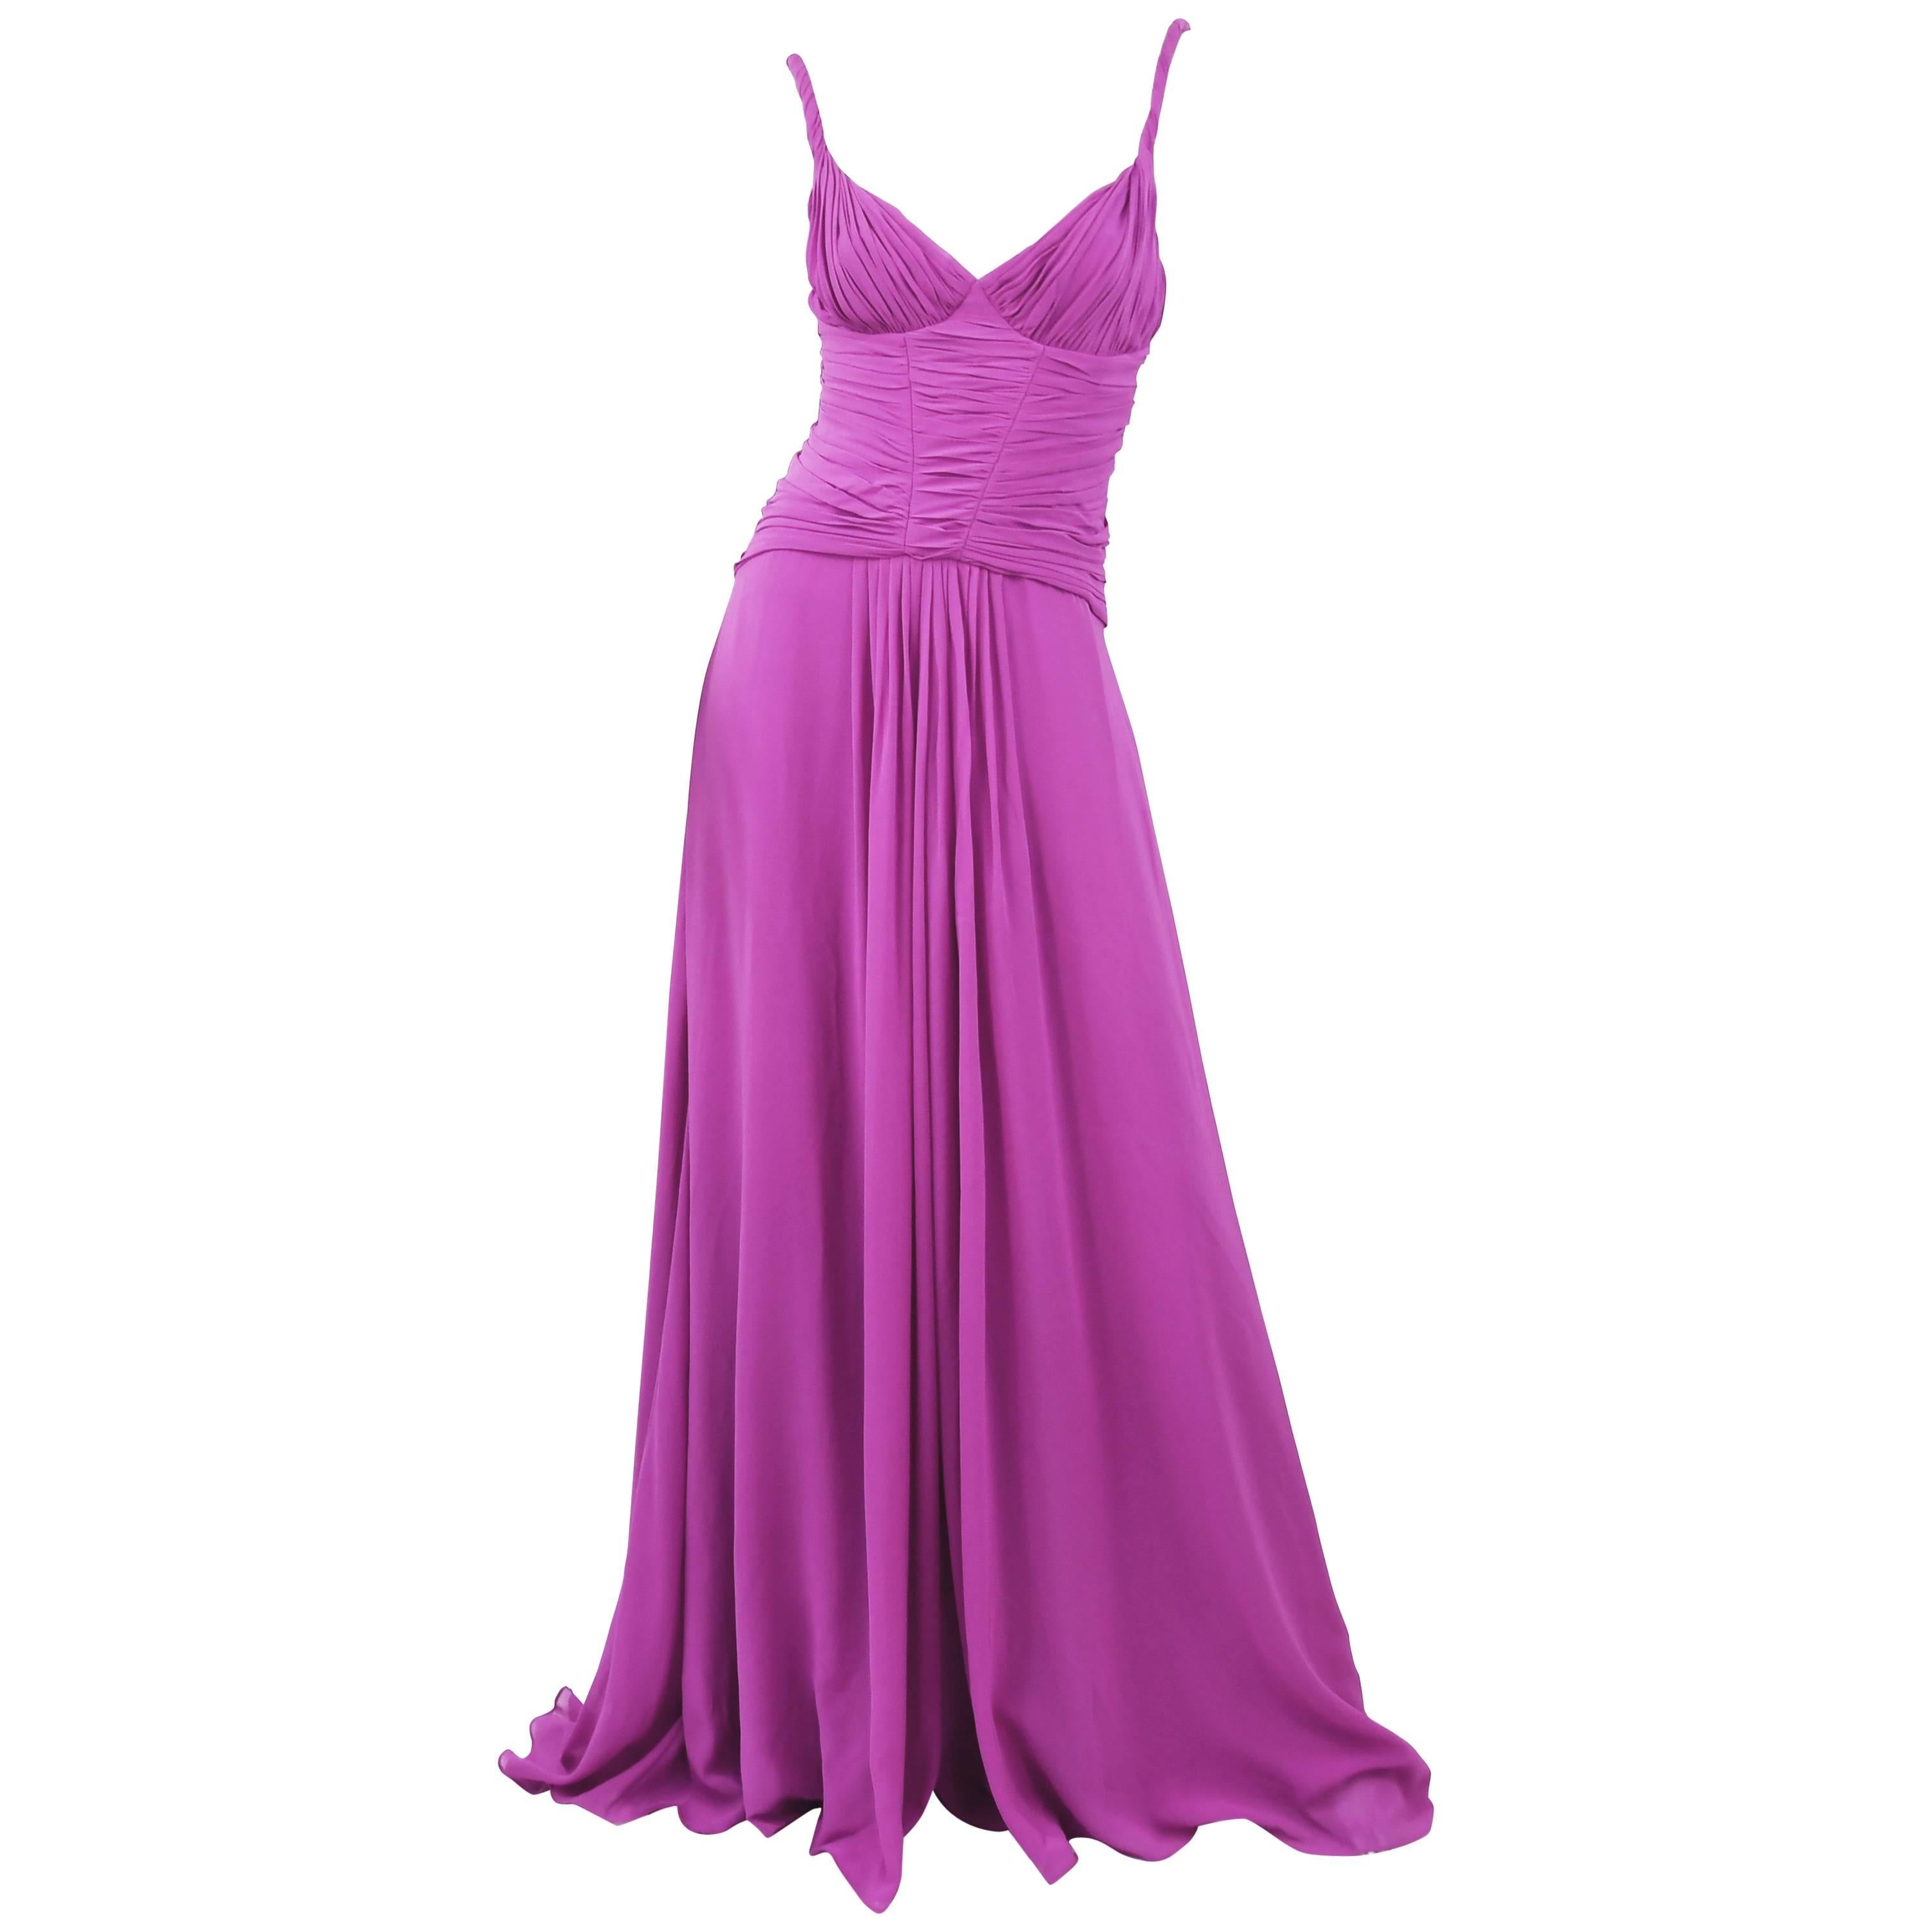 Emanuel Ungaro Long Chiffon Gown in Magenta, Size 4 For Sale